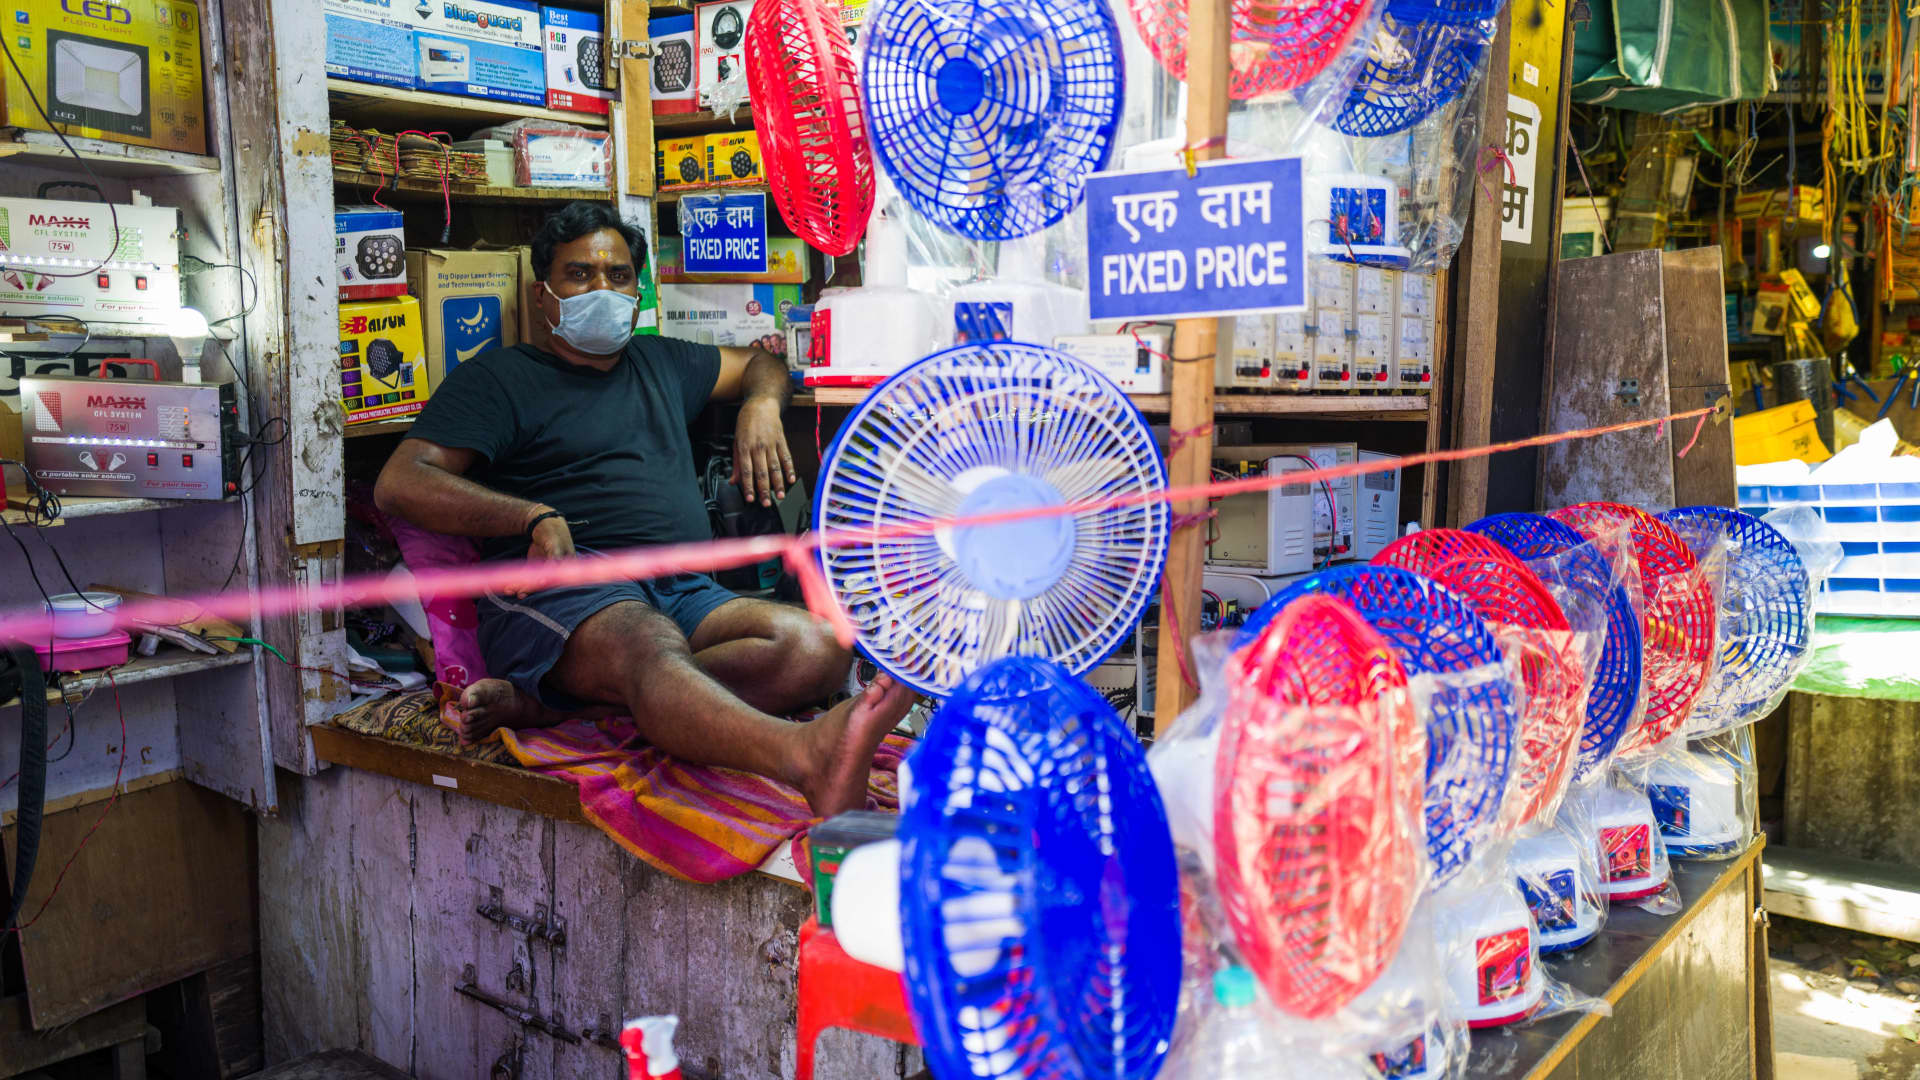 A man waits for customers displaying fans at his store amid rising temperatures in New Delhi on May 27, 2020. - India is wilting under a heatwave, with the temperature in places reaching 50 degrees Celsius (122 degrees Fahrenheit) and the capital enduring its hottest May day in nearly two decades.